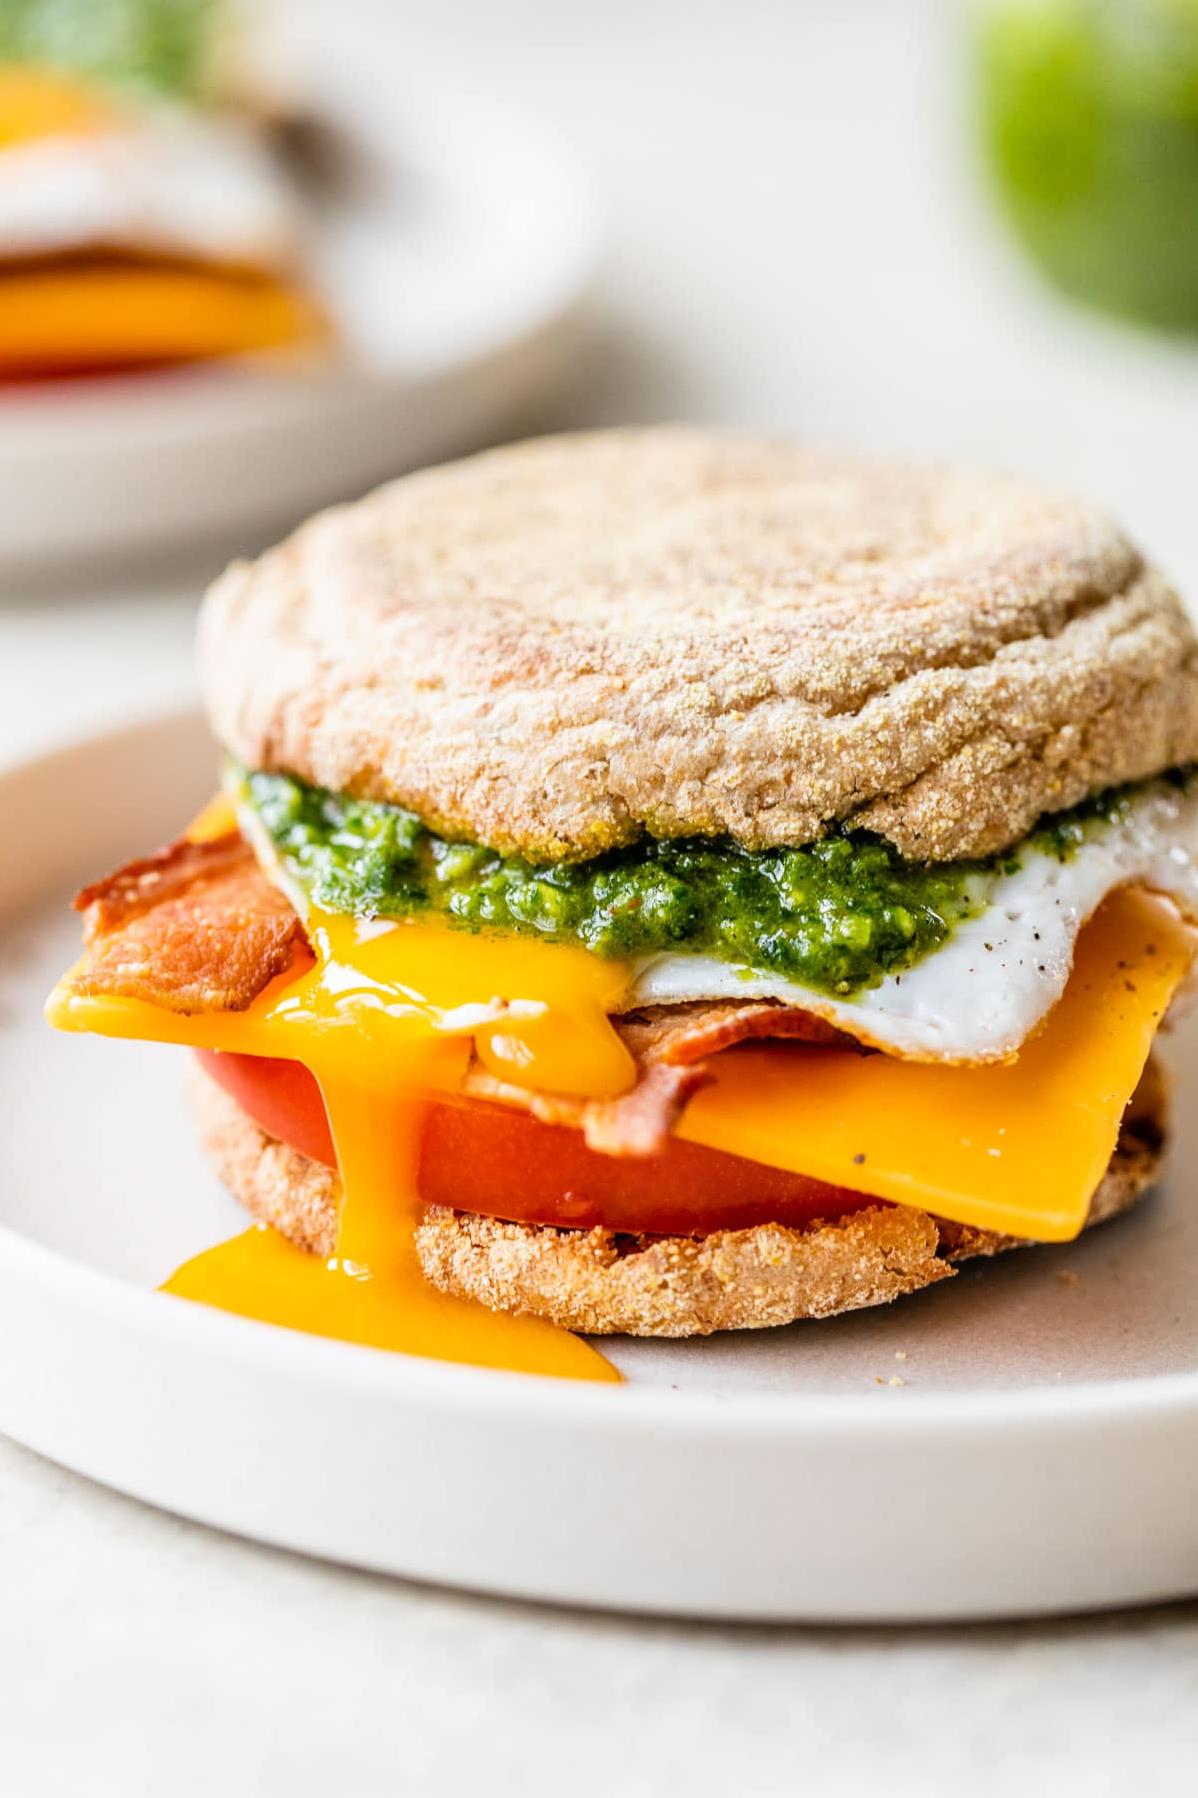  A crispy breakfast sandwich that will change your mornings forever.